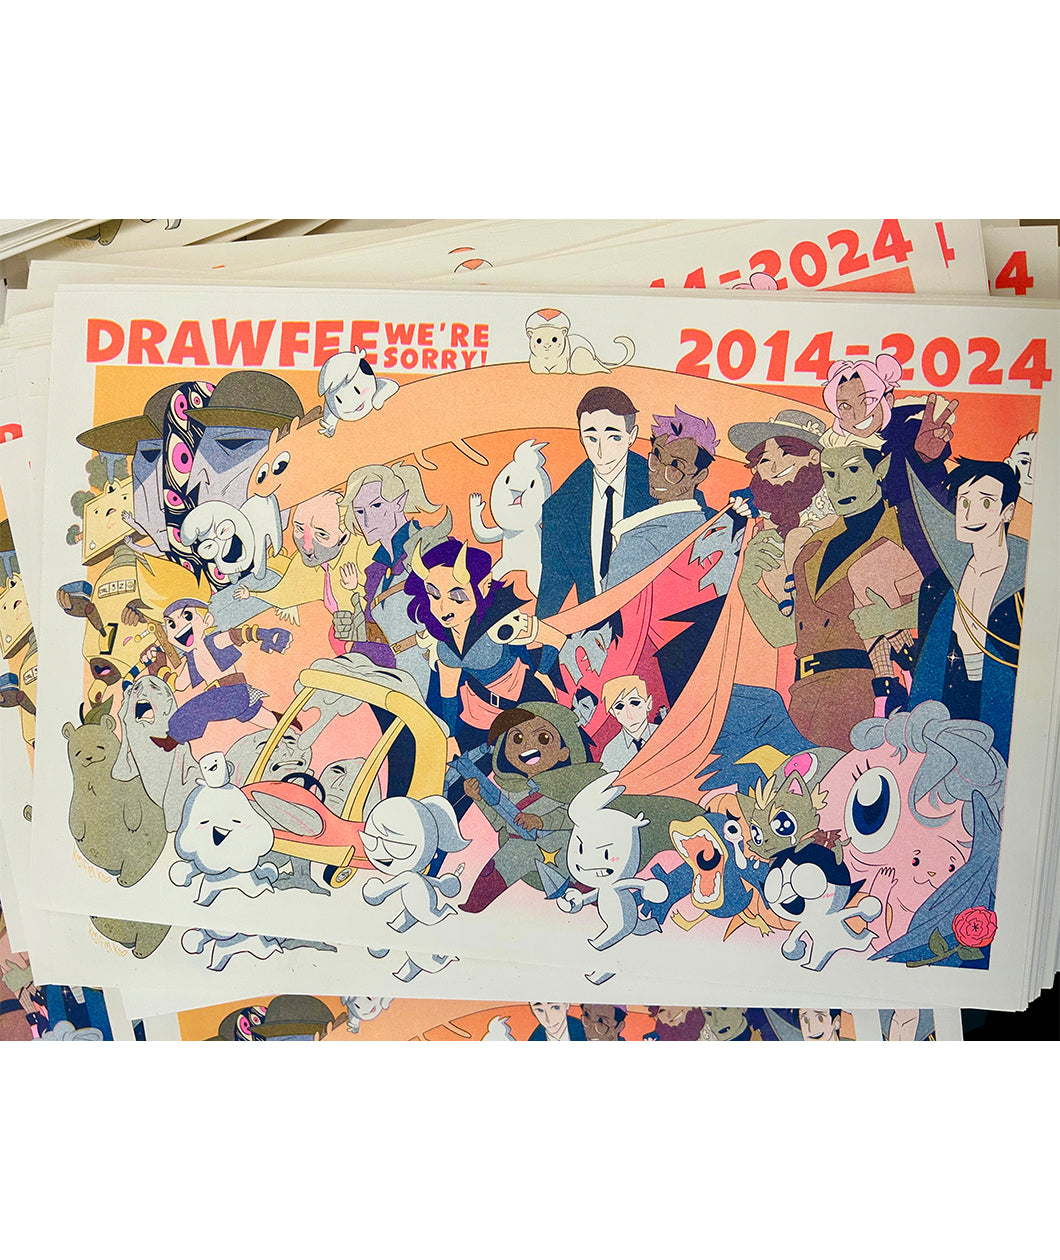 A stack of risograph print posters of the Drawfee cast and other characters.